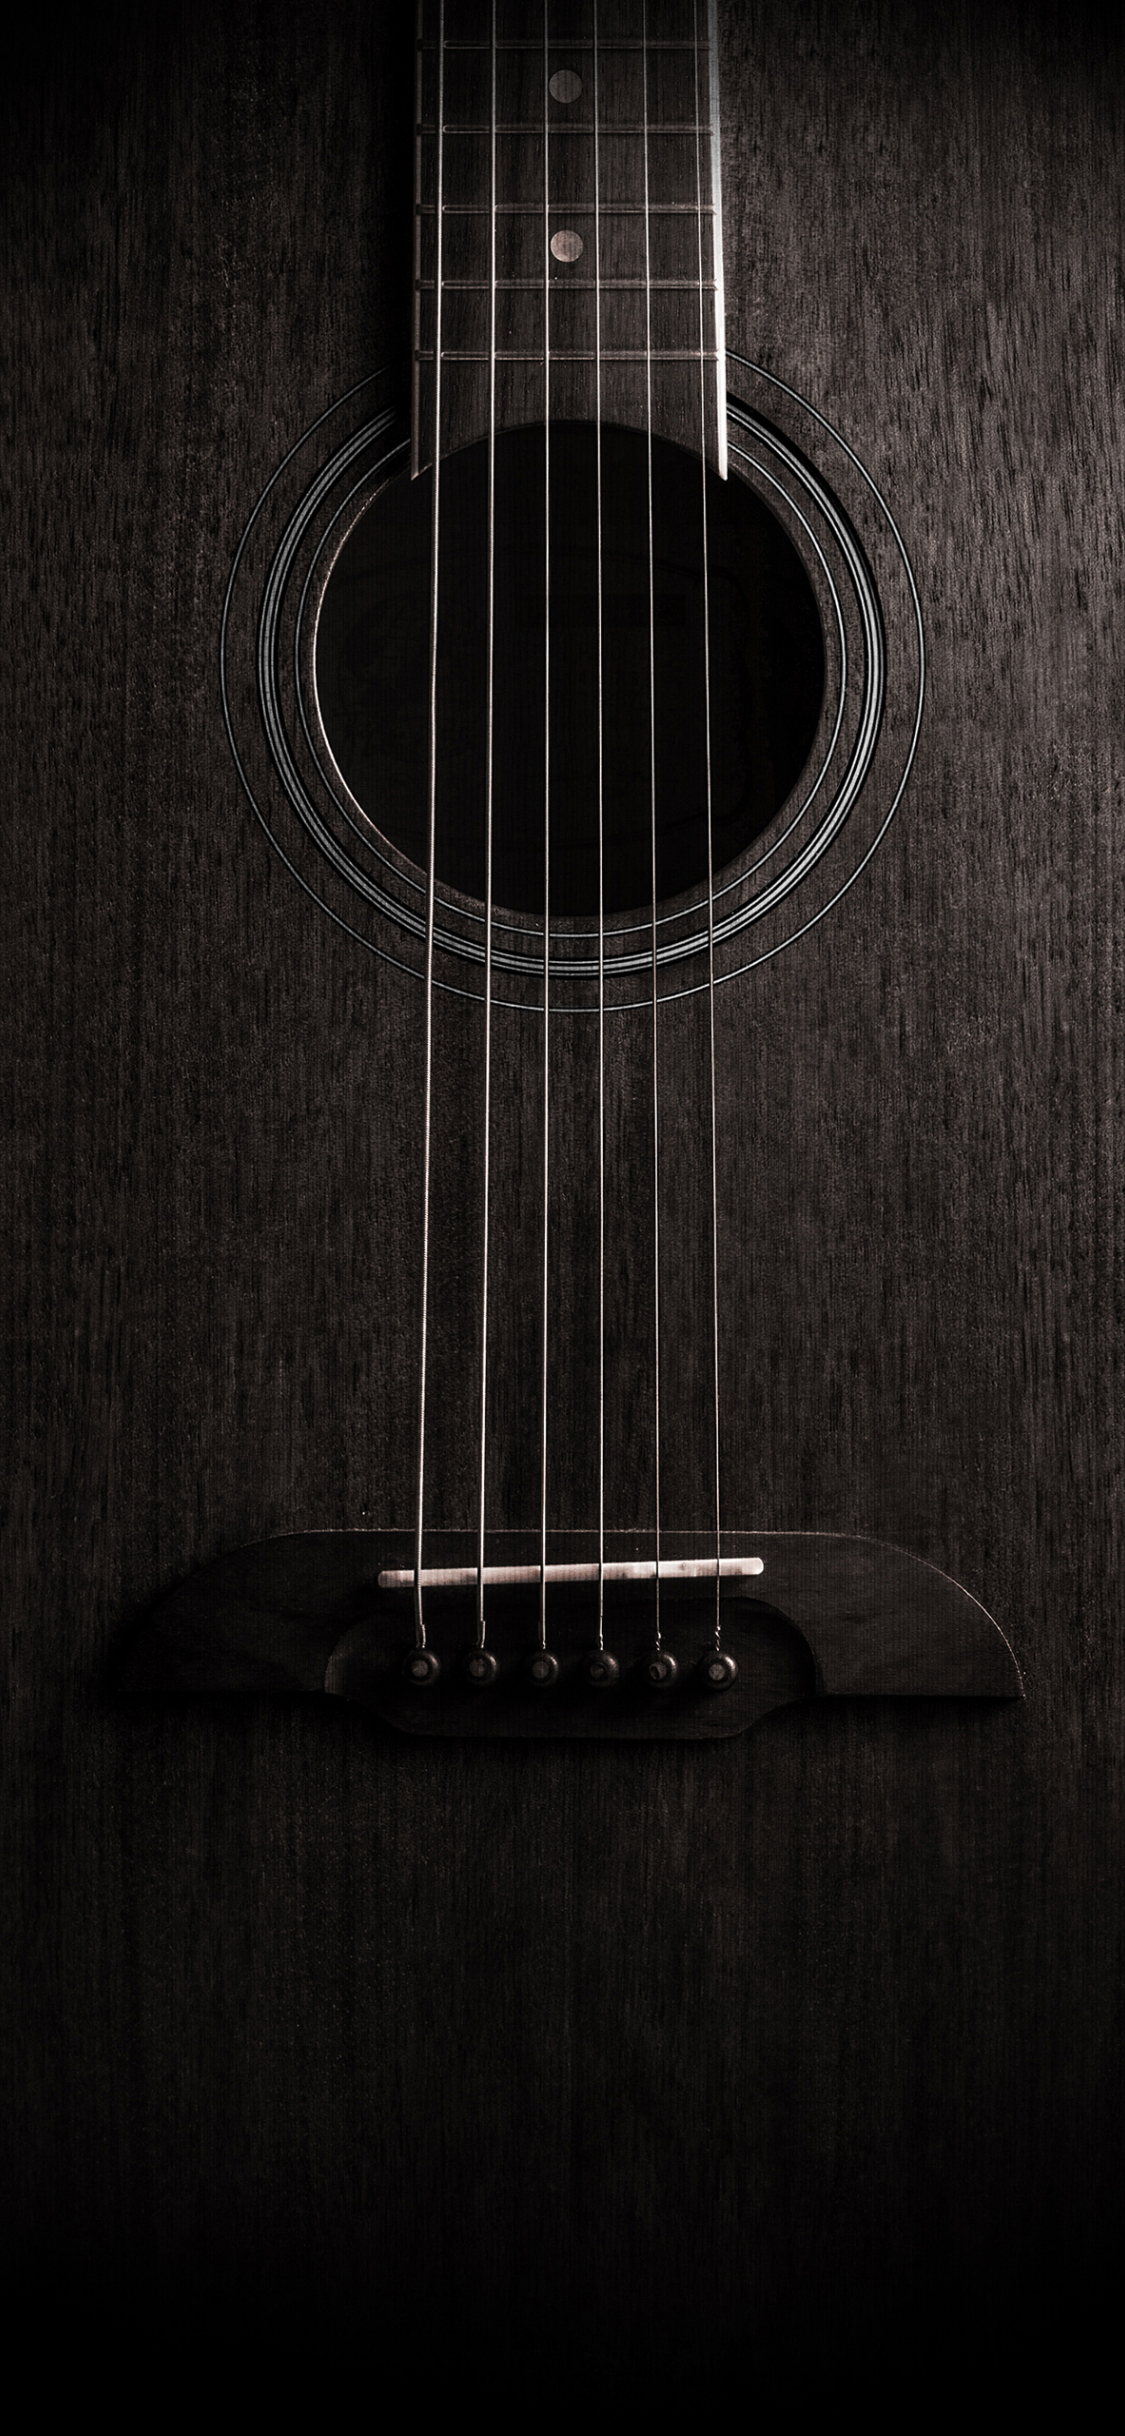 Download wallpaper 1125x2436 guitar, musical instrument, huawei mate 10,  stock, iphone x, 1125x2436 hd background, 511